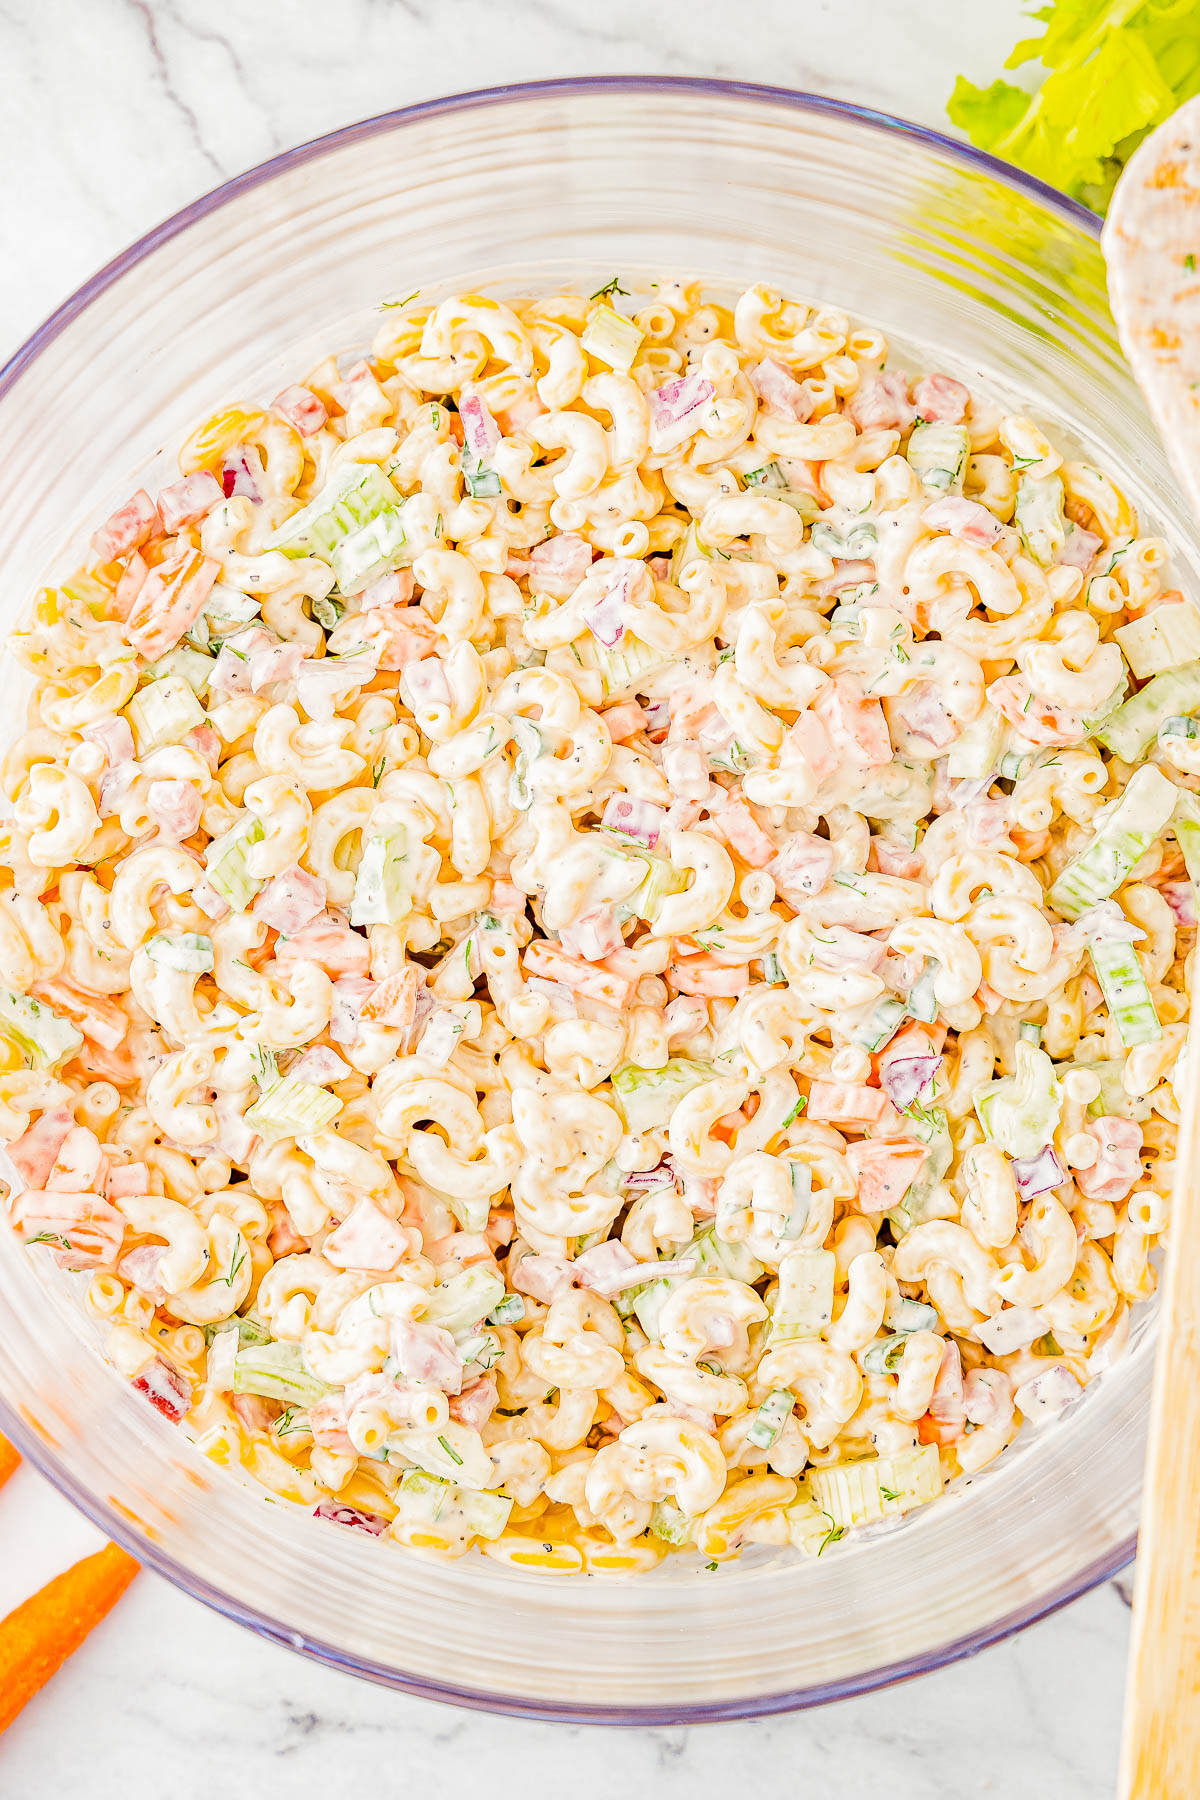 Classic Macaroni Salad - This fast and easy pasta salad recipe with tender elbow macaroni, bell peppers, carrots, celery, ham, and a super creamy dressing is a family FAVORITE! You can make it up to a day in advance if you want to get ahead and serve it at your next casual get together, backyard barbecue, picnic, potluck, or weeknight family dinner! Everyone always wants seconds!  